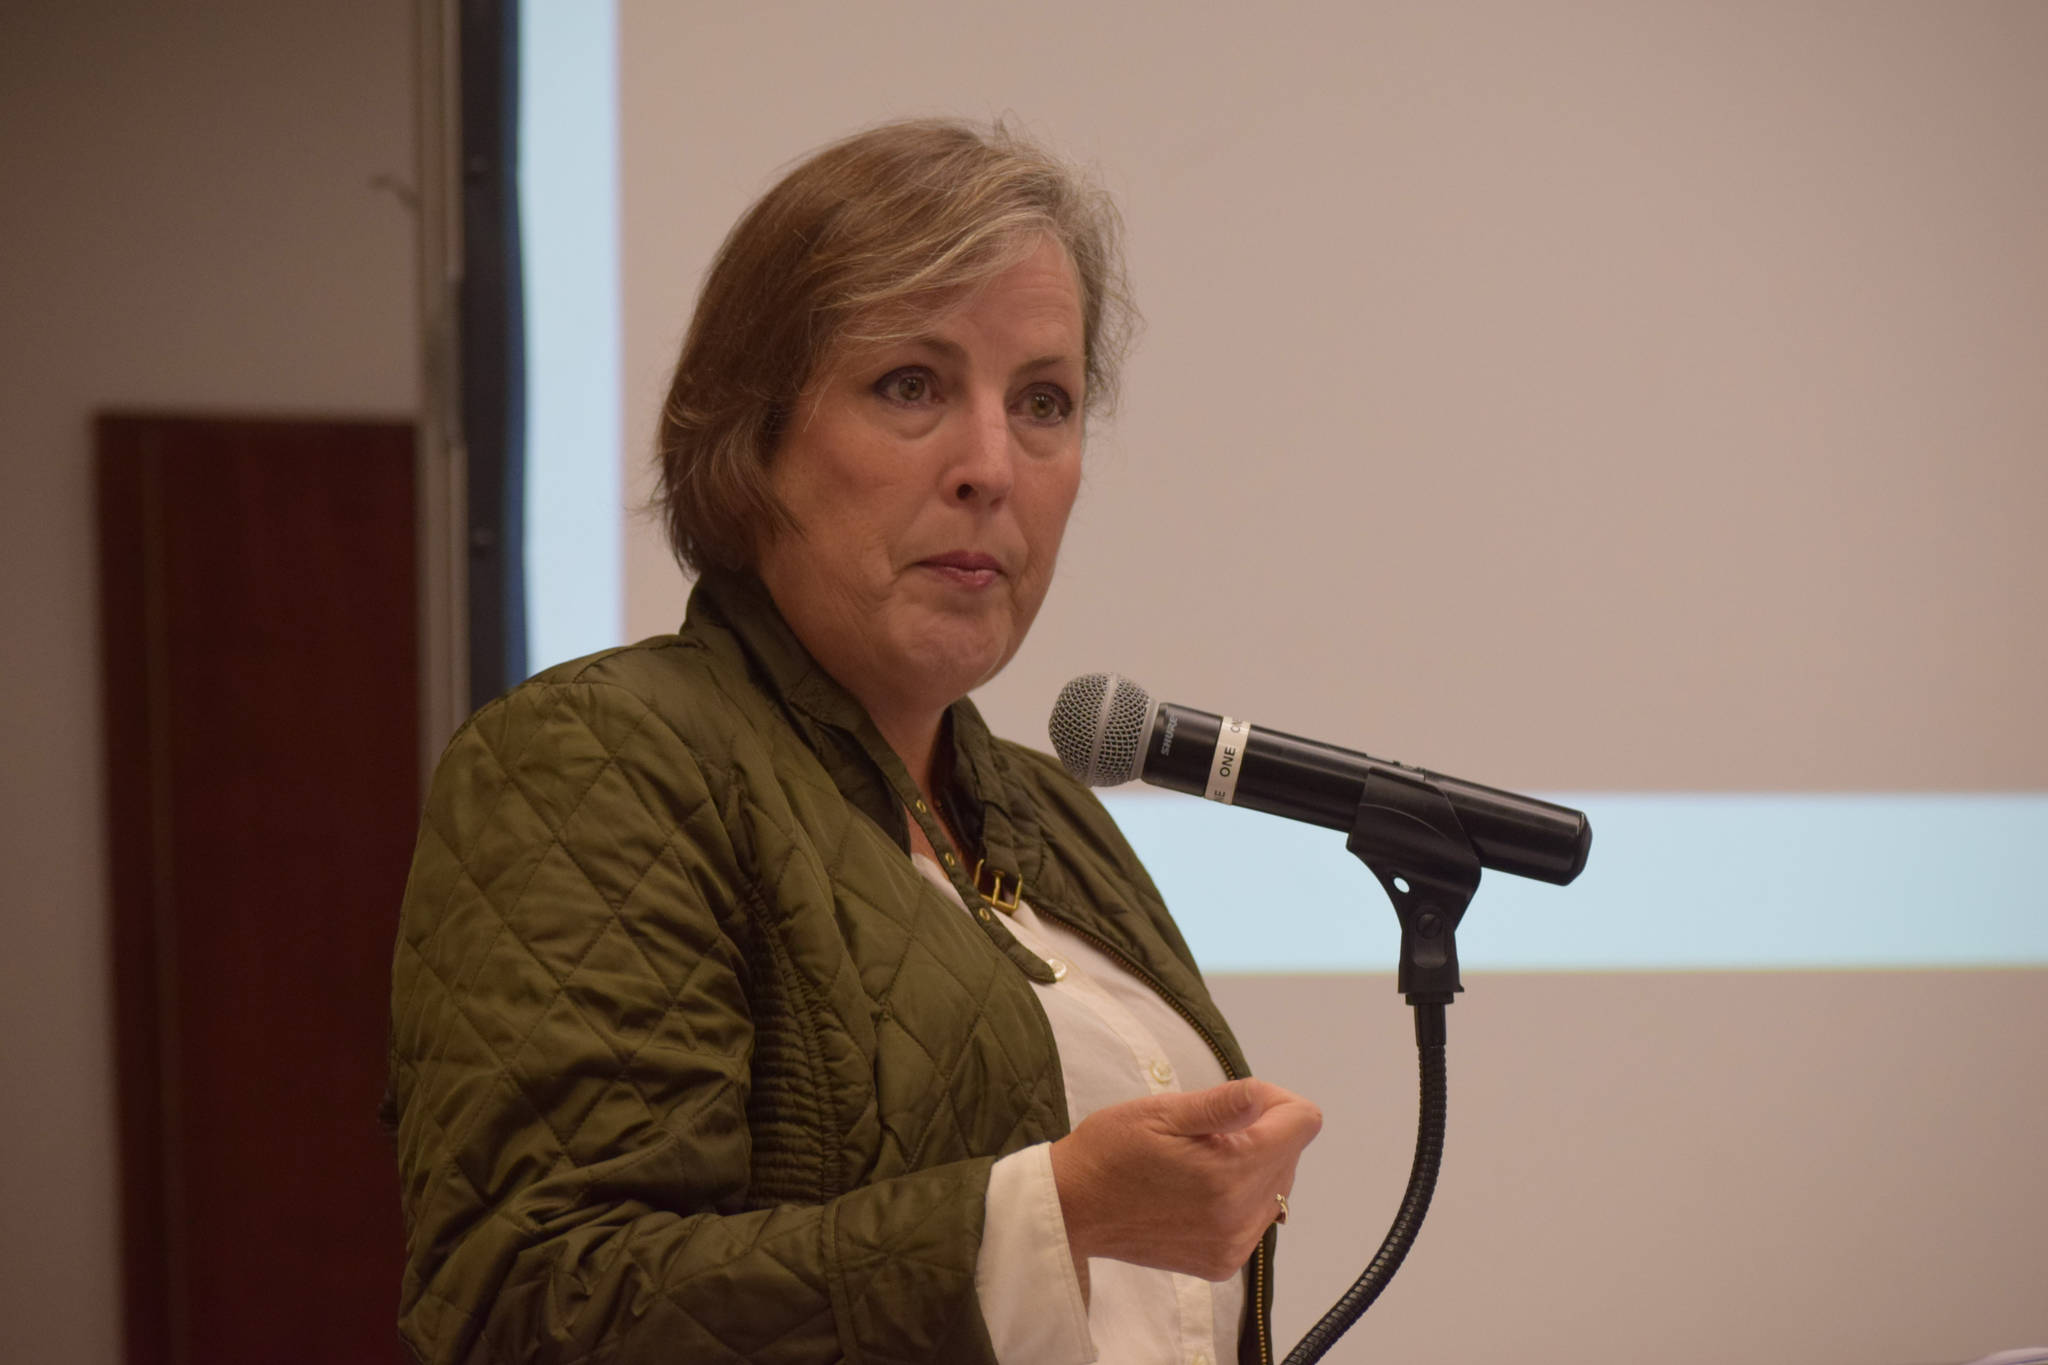 Alaska Permanent Fund Corporation CEO Angela Rodell speaks on the state of the Alaska Permanent Fund at the Kenai Chamber of Commerce and Visitor Center on Wednesday, Aug. 18, 2021. (Camille Botello/Peninsula Clarion)